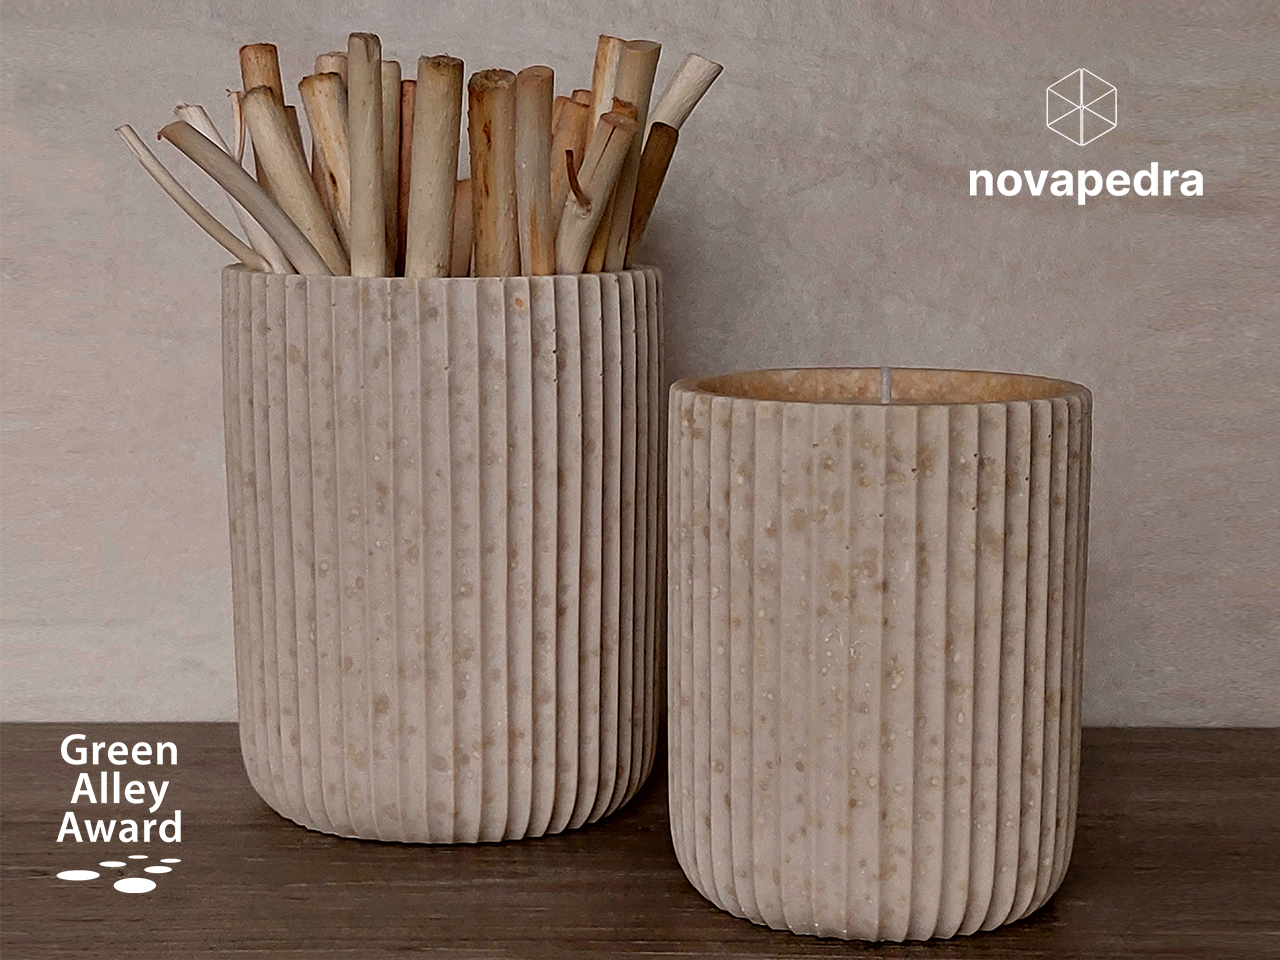 Novapedra produces ceramics from organic waste, without using natural gas in the manufacturing process.